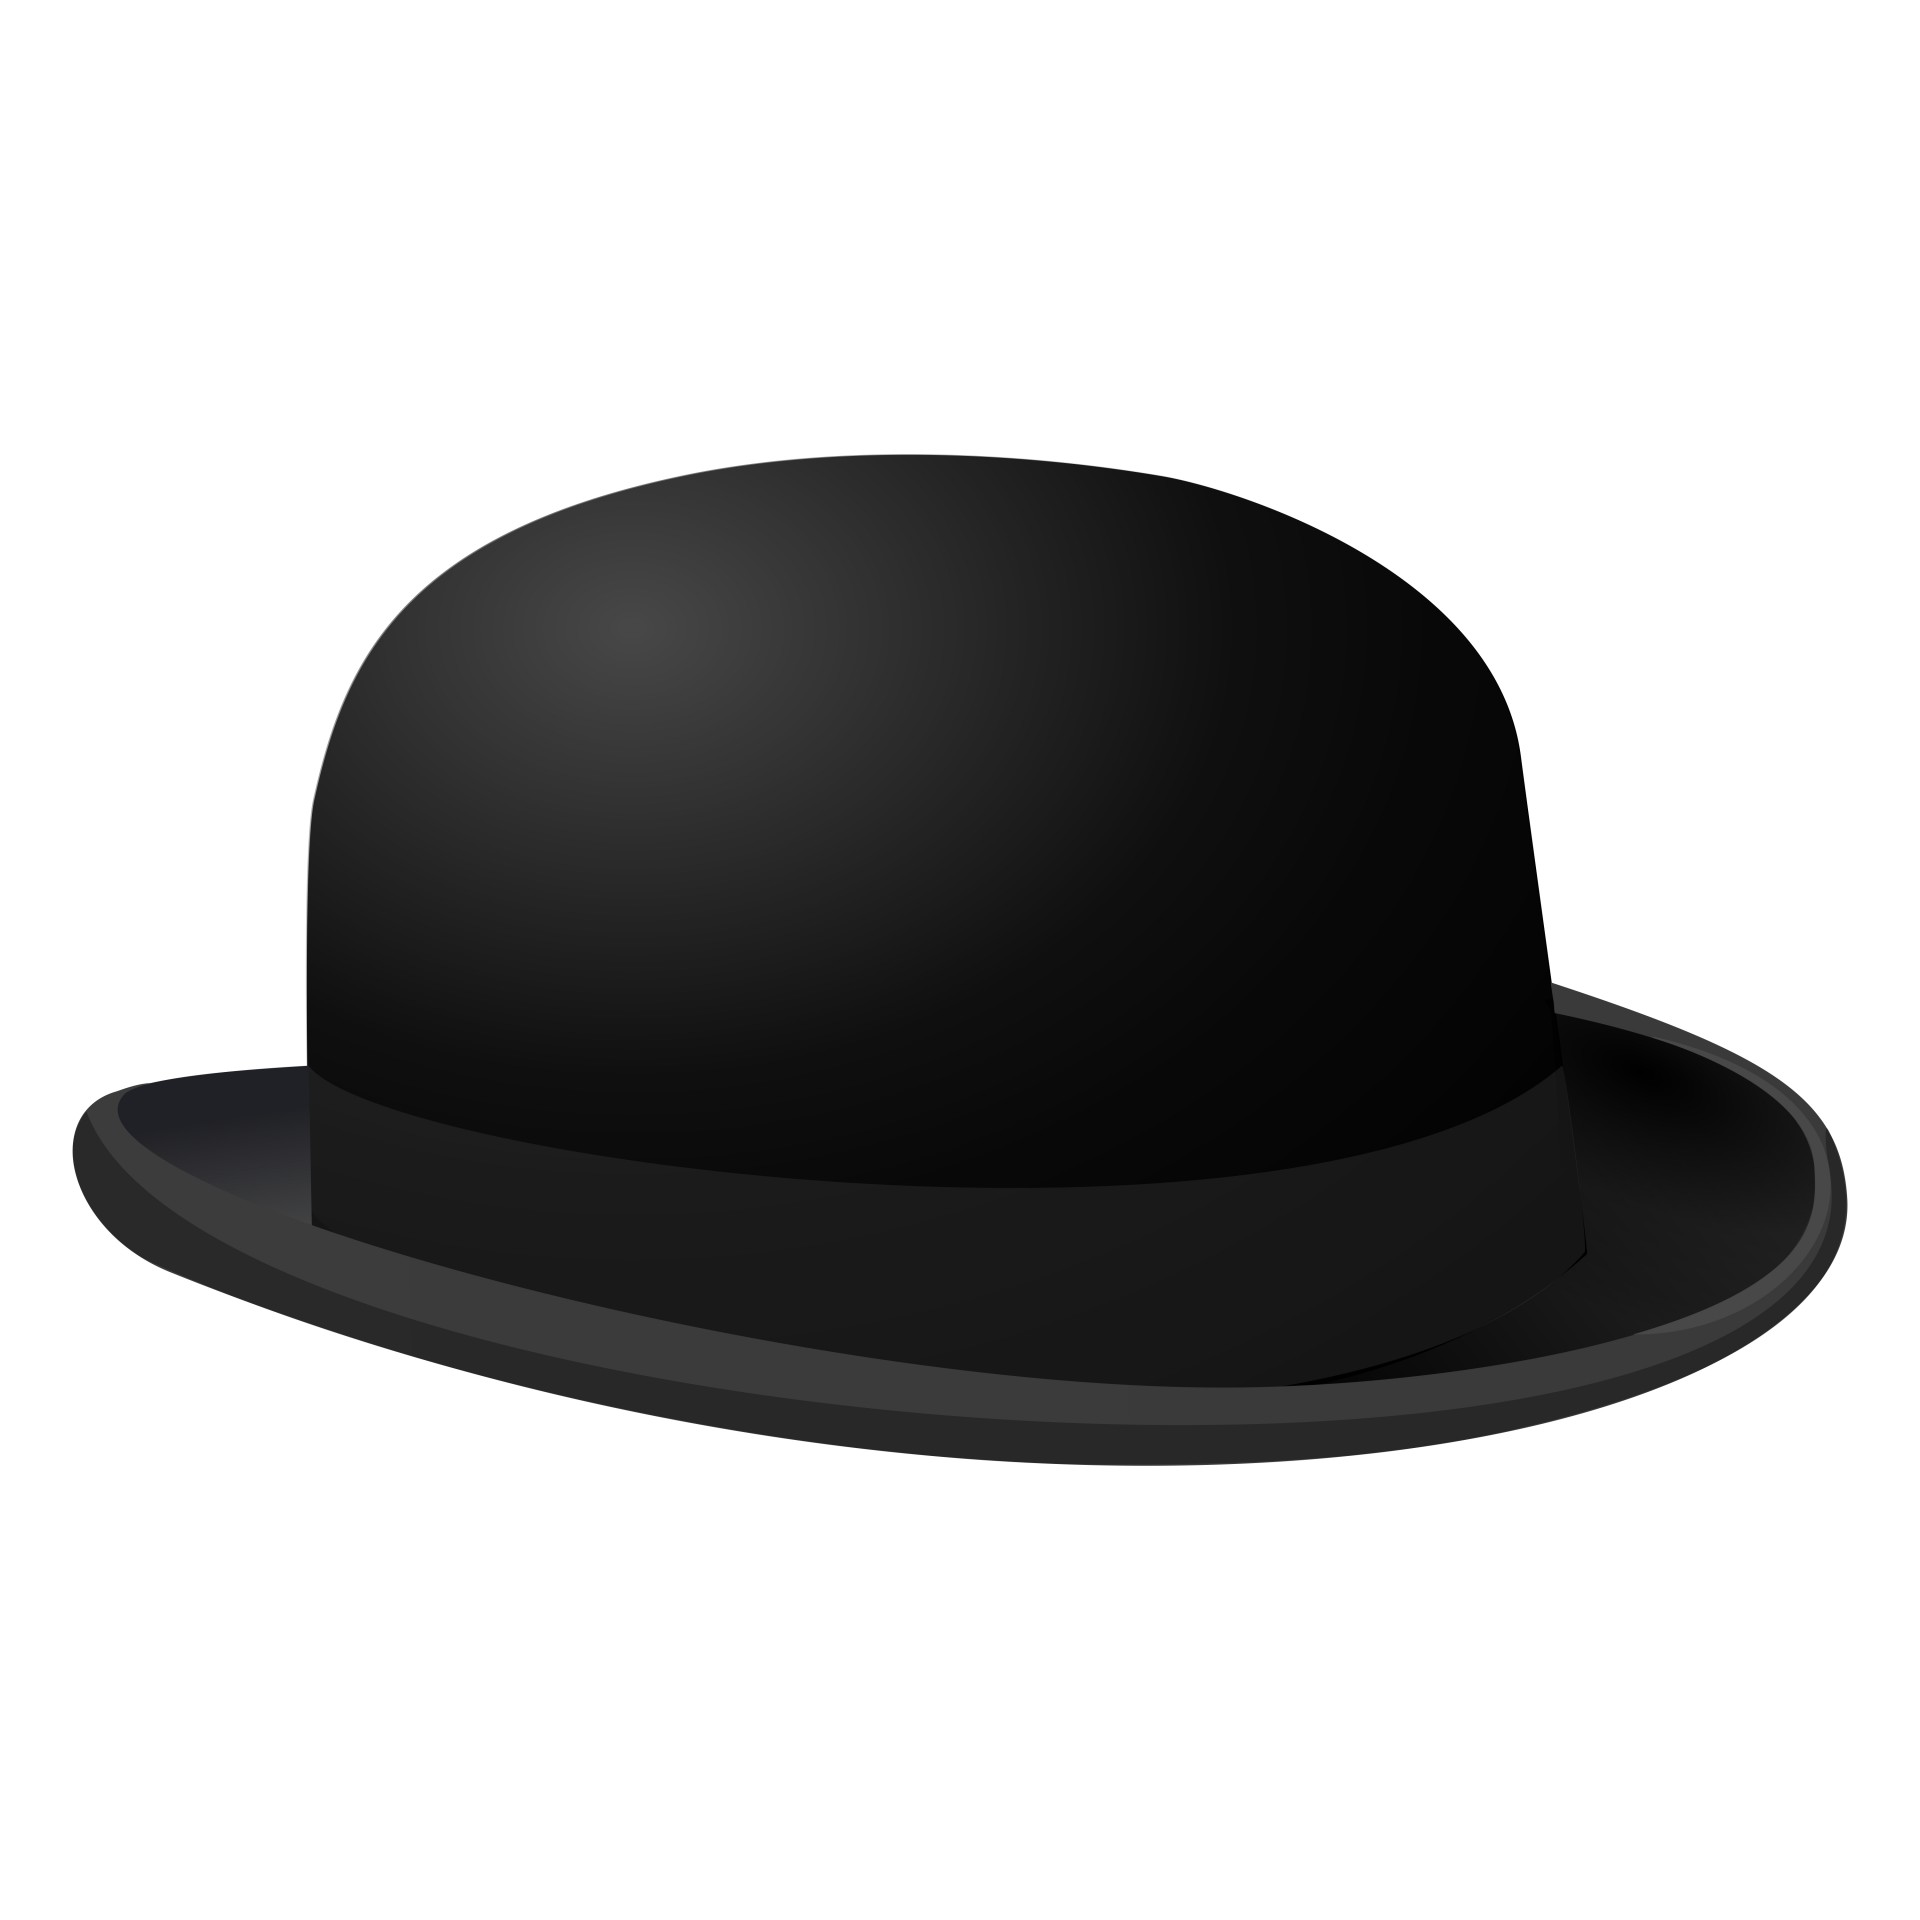 Silhouette Symbol Of Bowler Hat Free Stock Photo - Public Domain Pictures